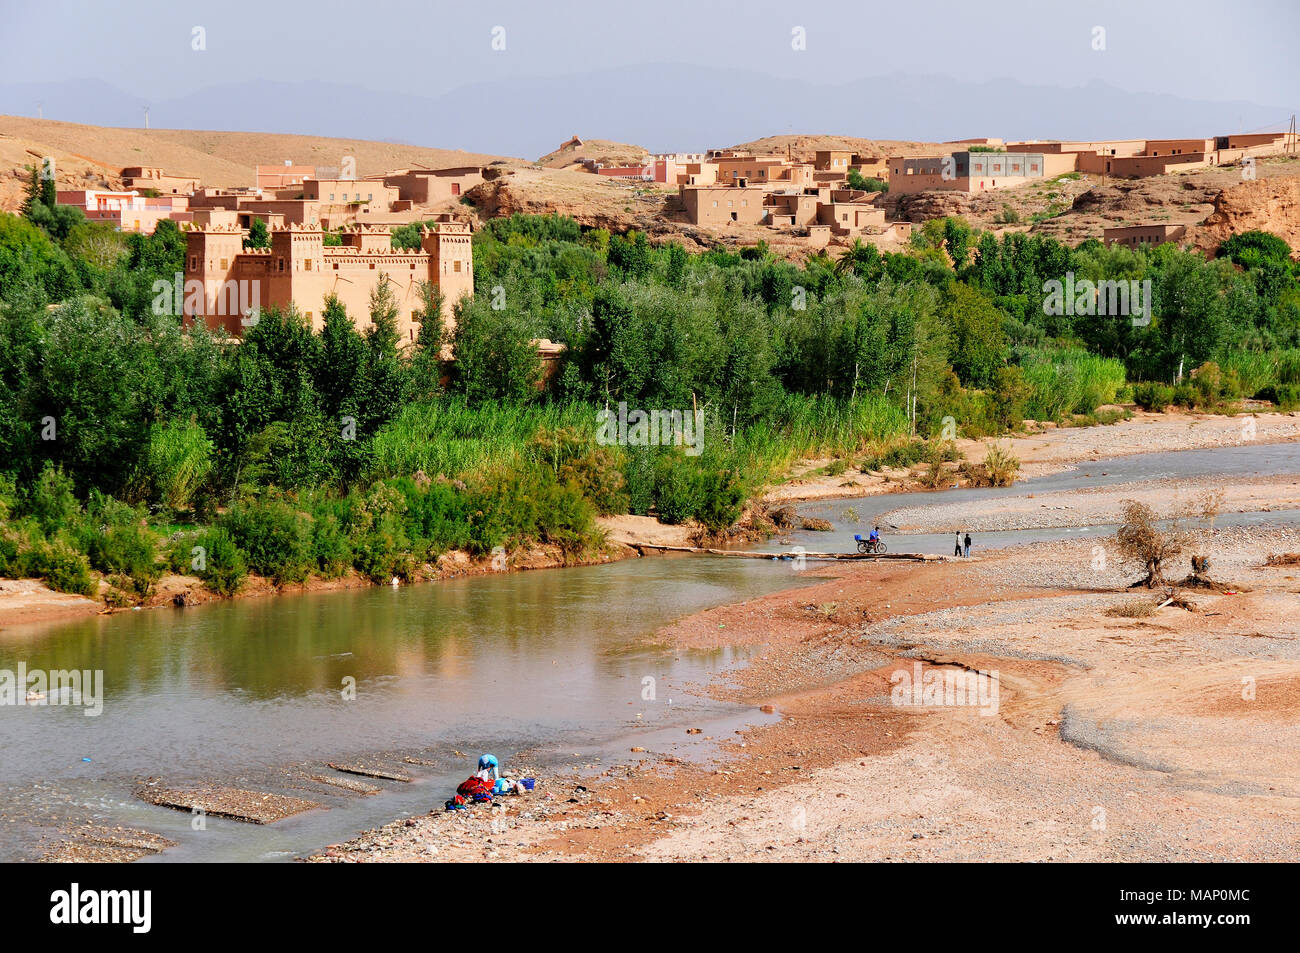 The oasis town of Kelaa M'Gouna famous for its roses. Morocco Stock Photo -  Alamy